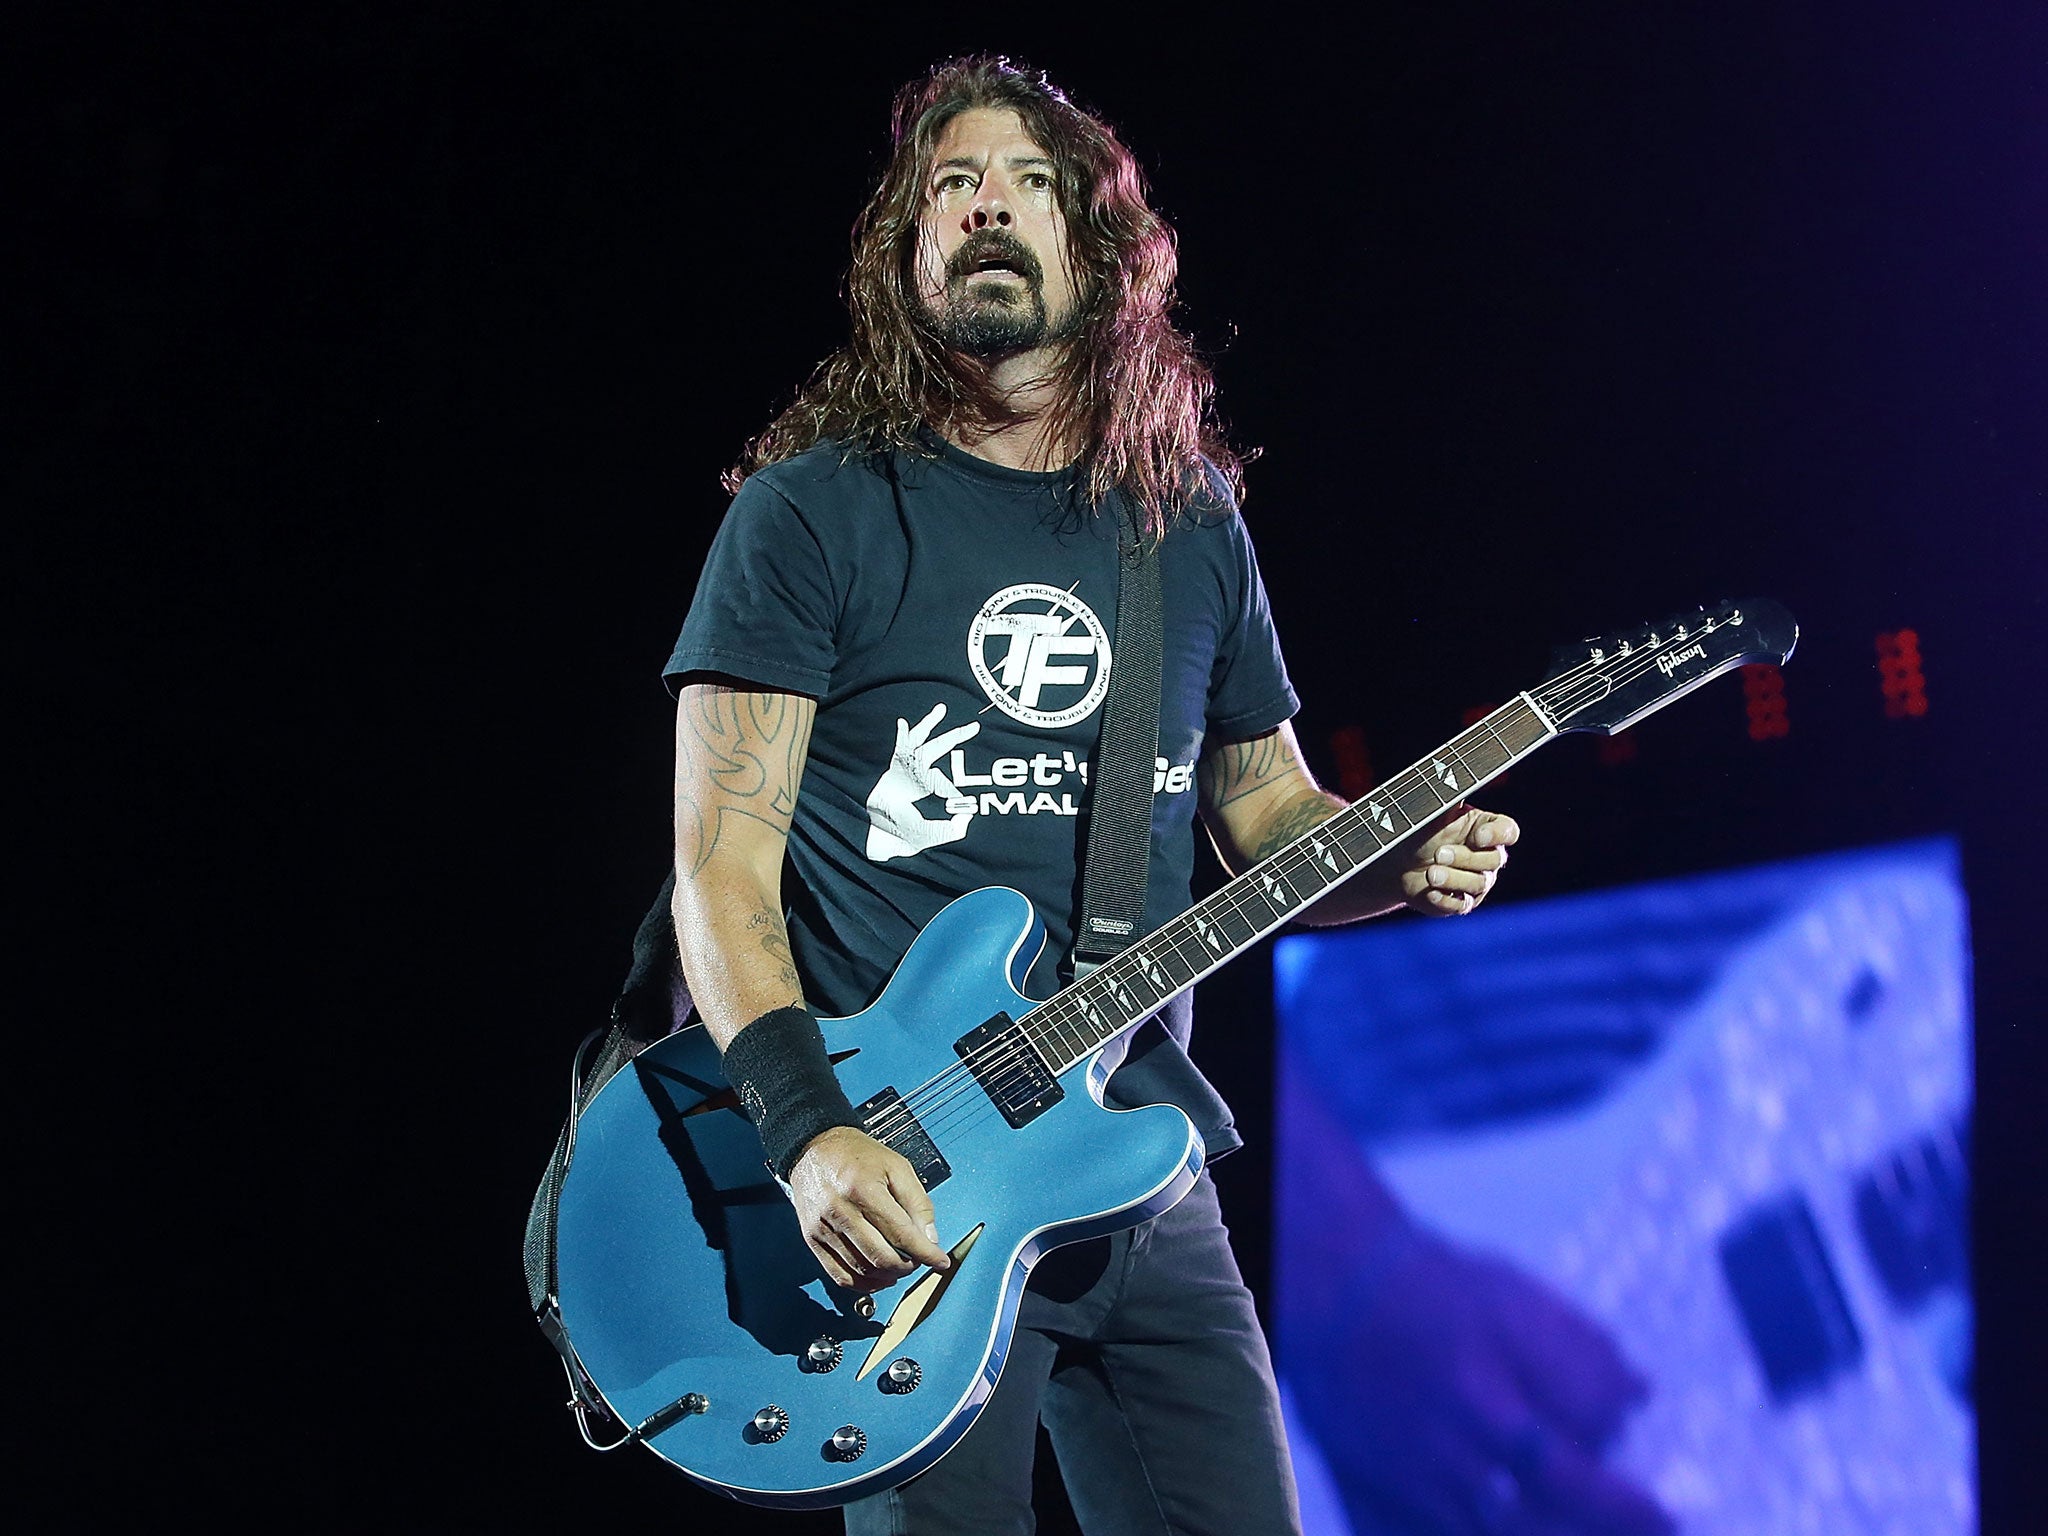 Dave Grohl of the Foo Fighters performs at Suncorp Stadium on February 24, 2015 in Brisbane, Australia.